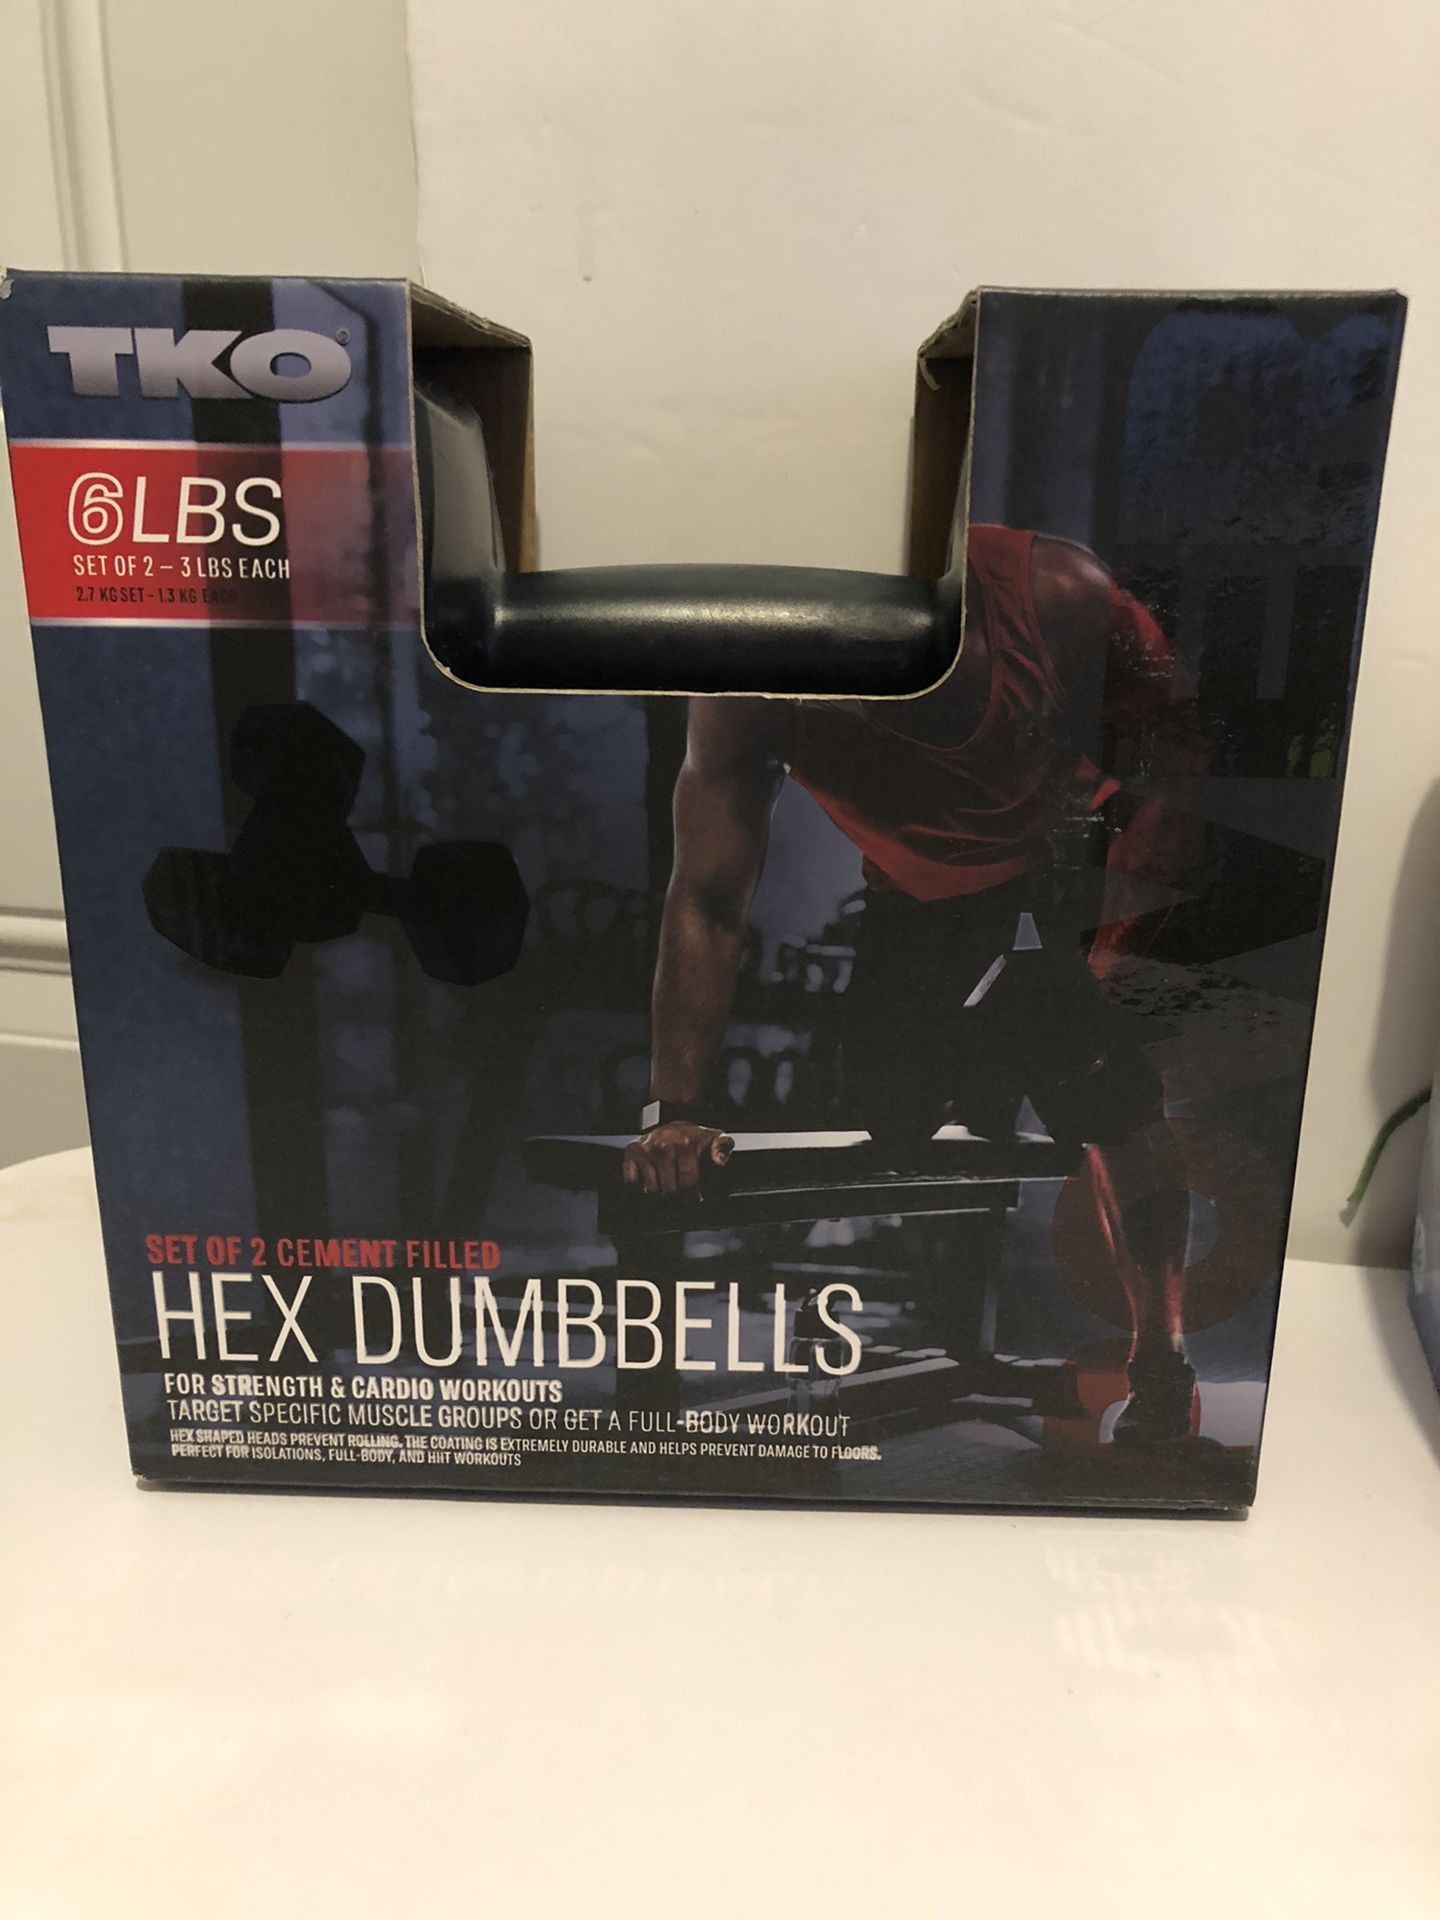 TKO Set Of 2 Cement Filled Hex Dumbbells 6 Pounds…. 3 Pounds Each.